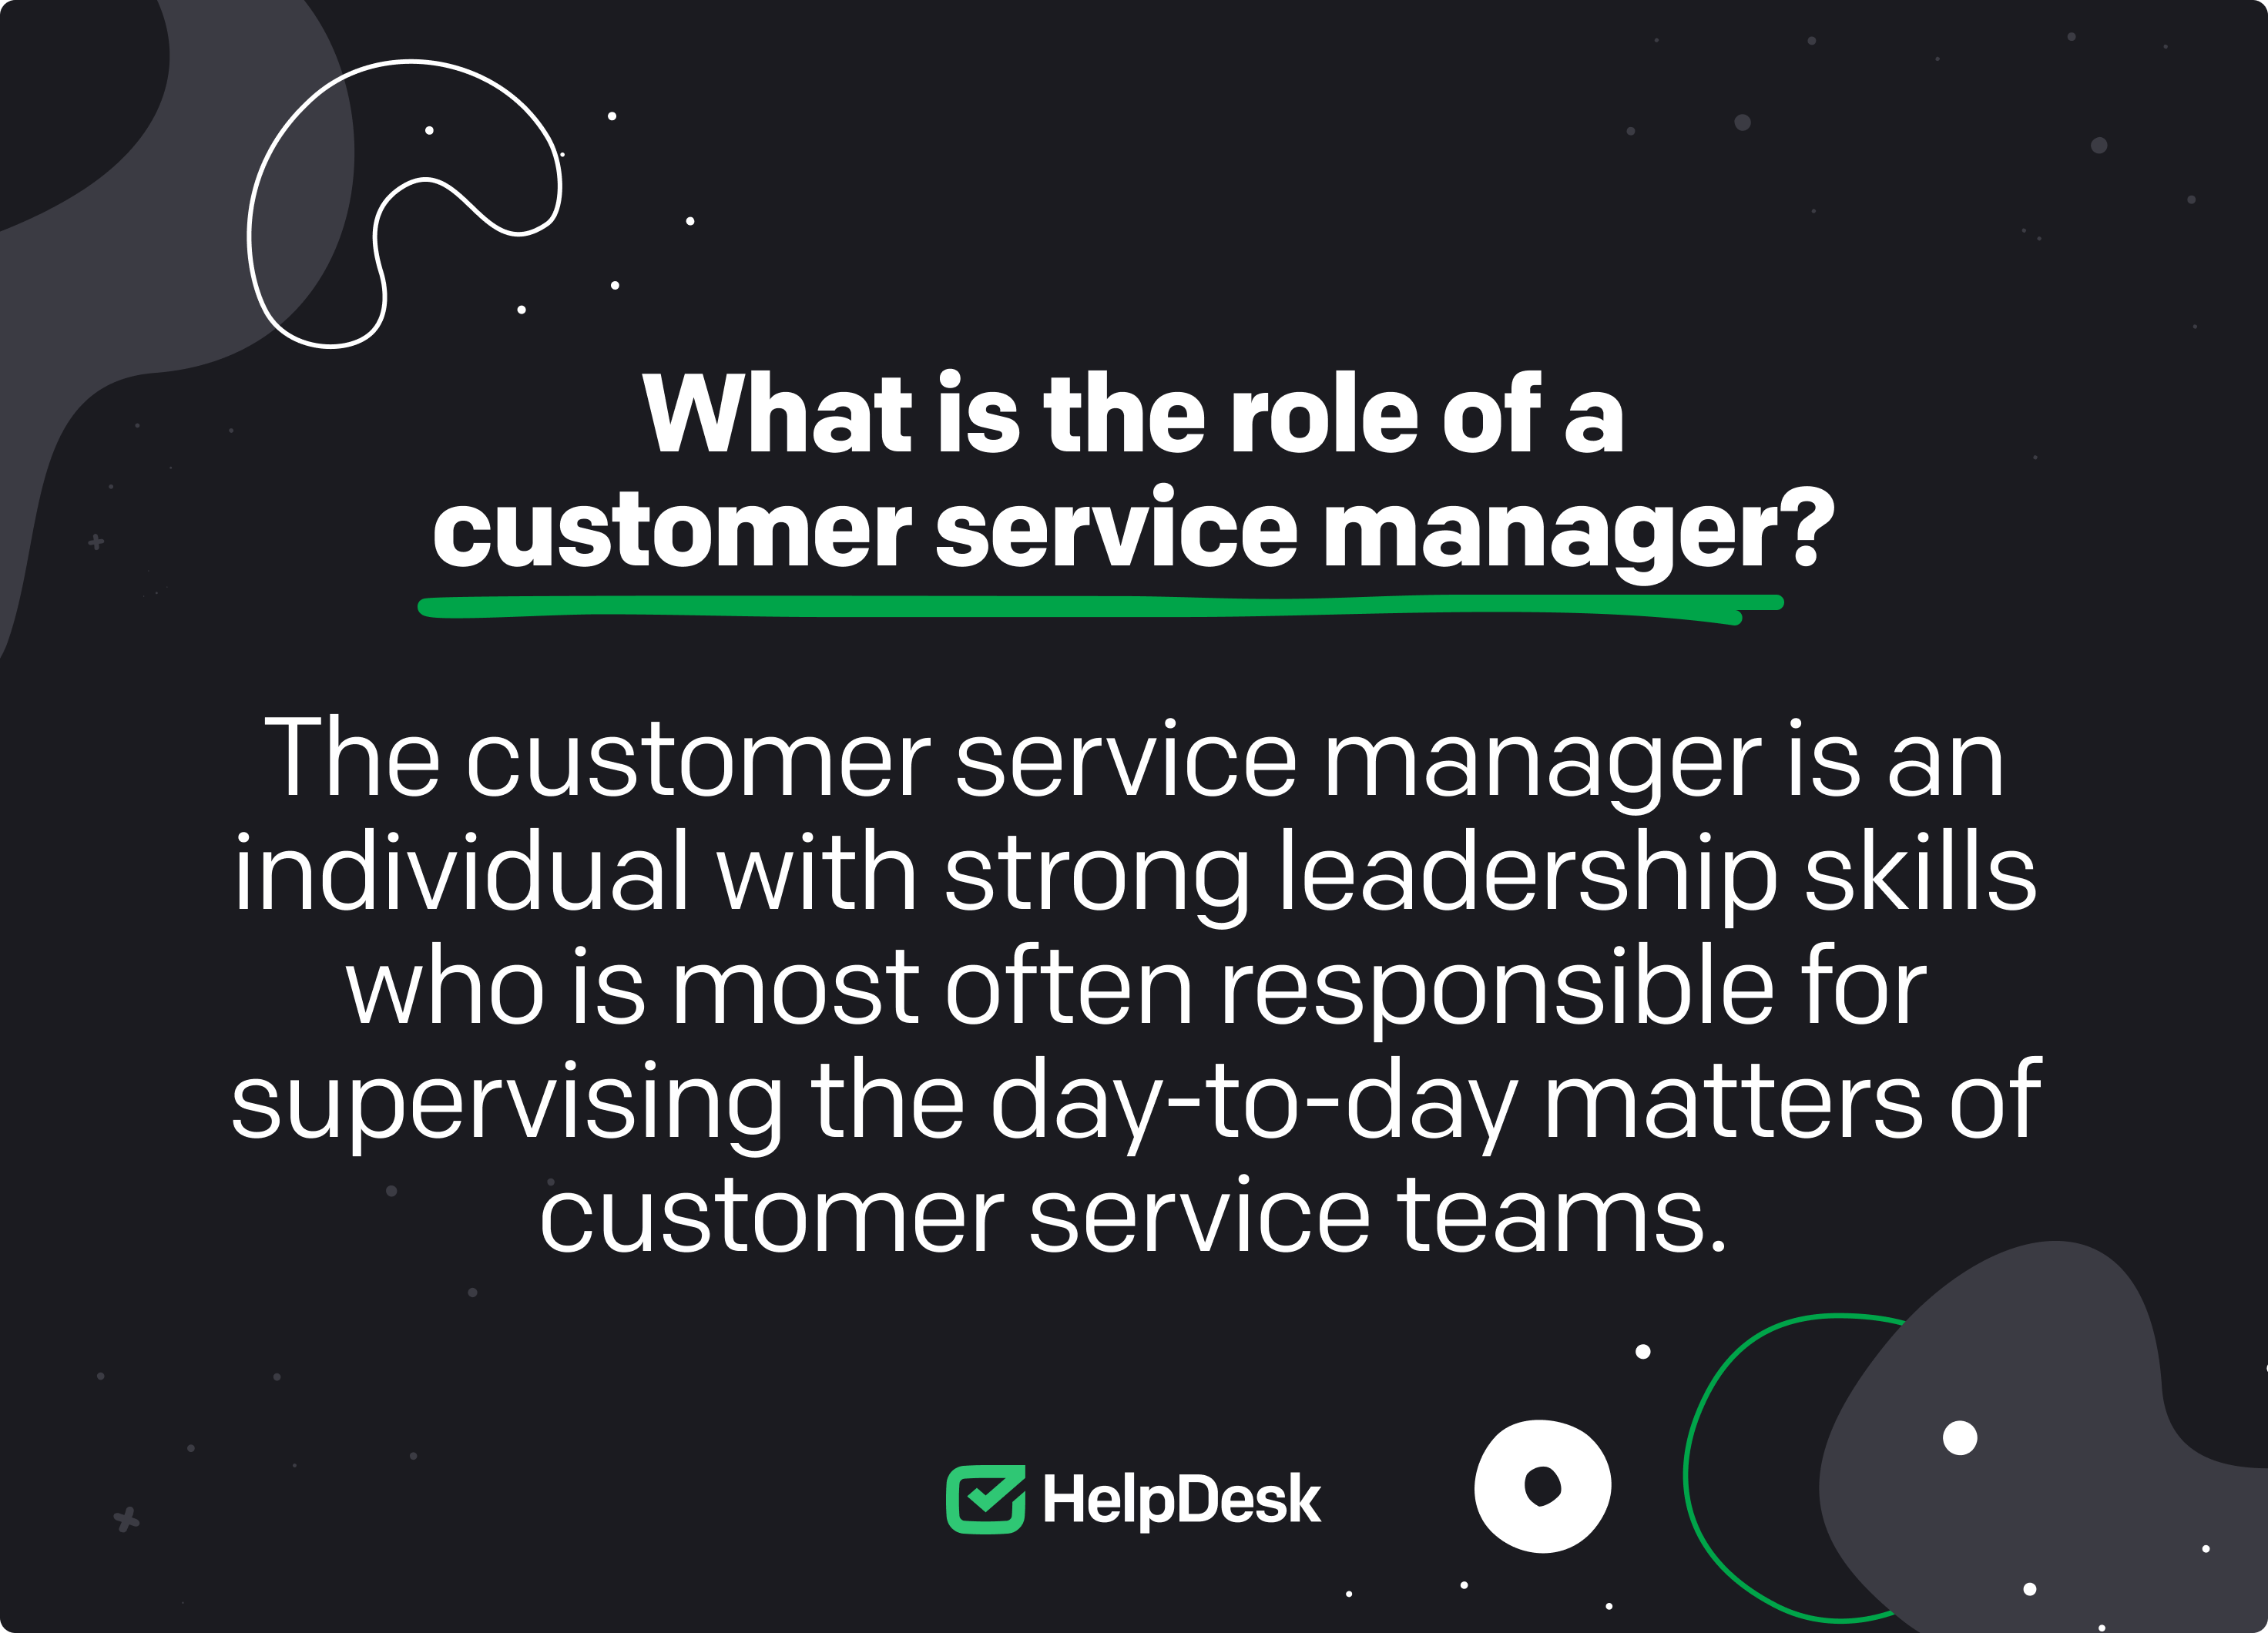 Definition of what the role of a customer service manager is. CS leader responsibilities scope.